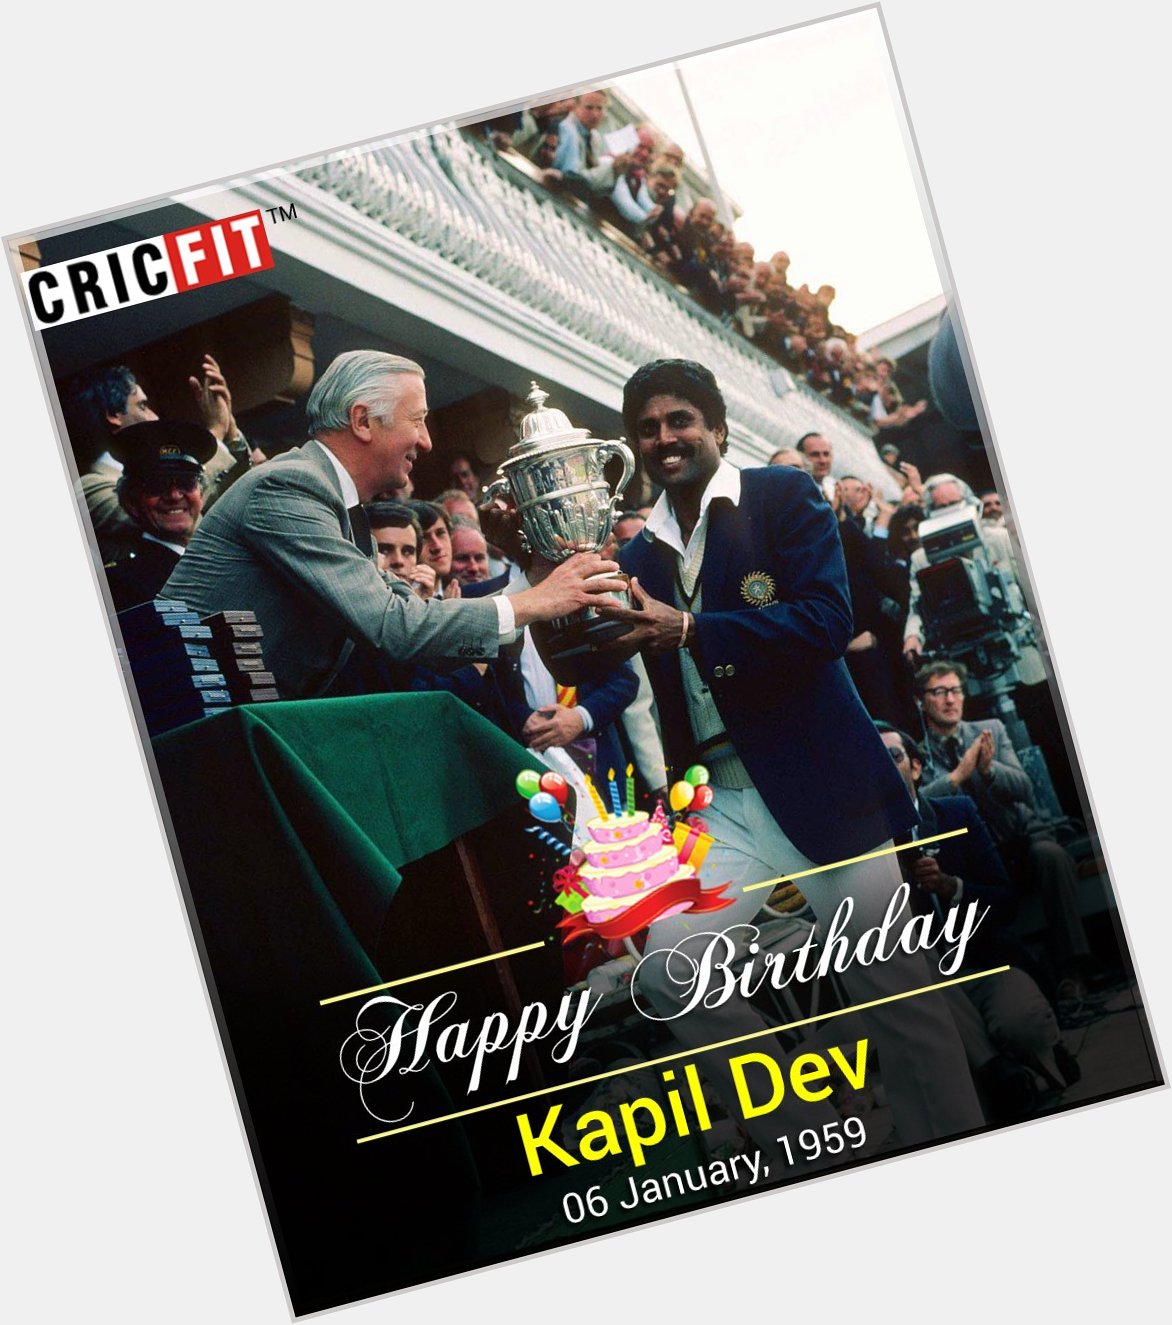 Cricfit Wishes one of the greatest all-rounders the game Kapil Dev a Very Happy Birthday! 